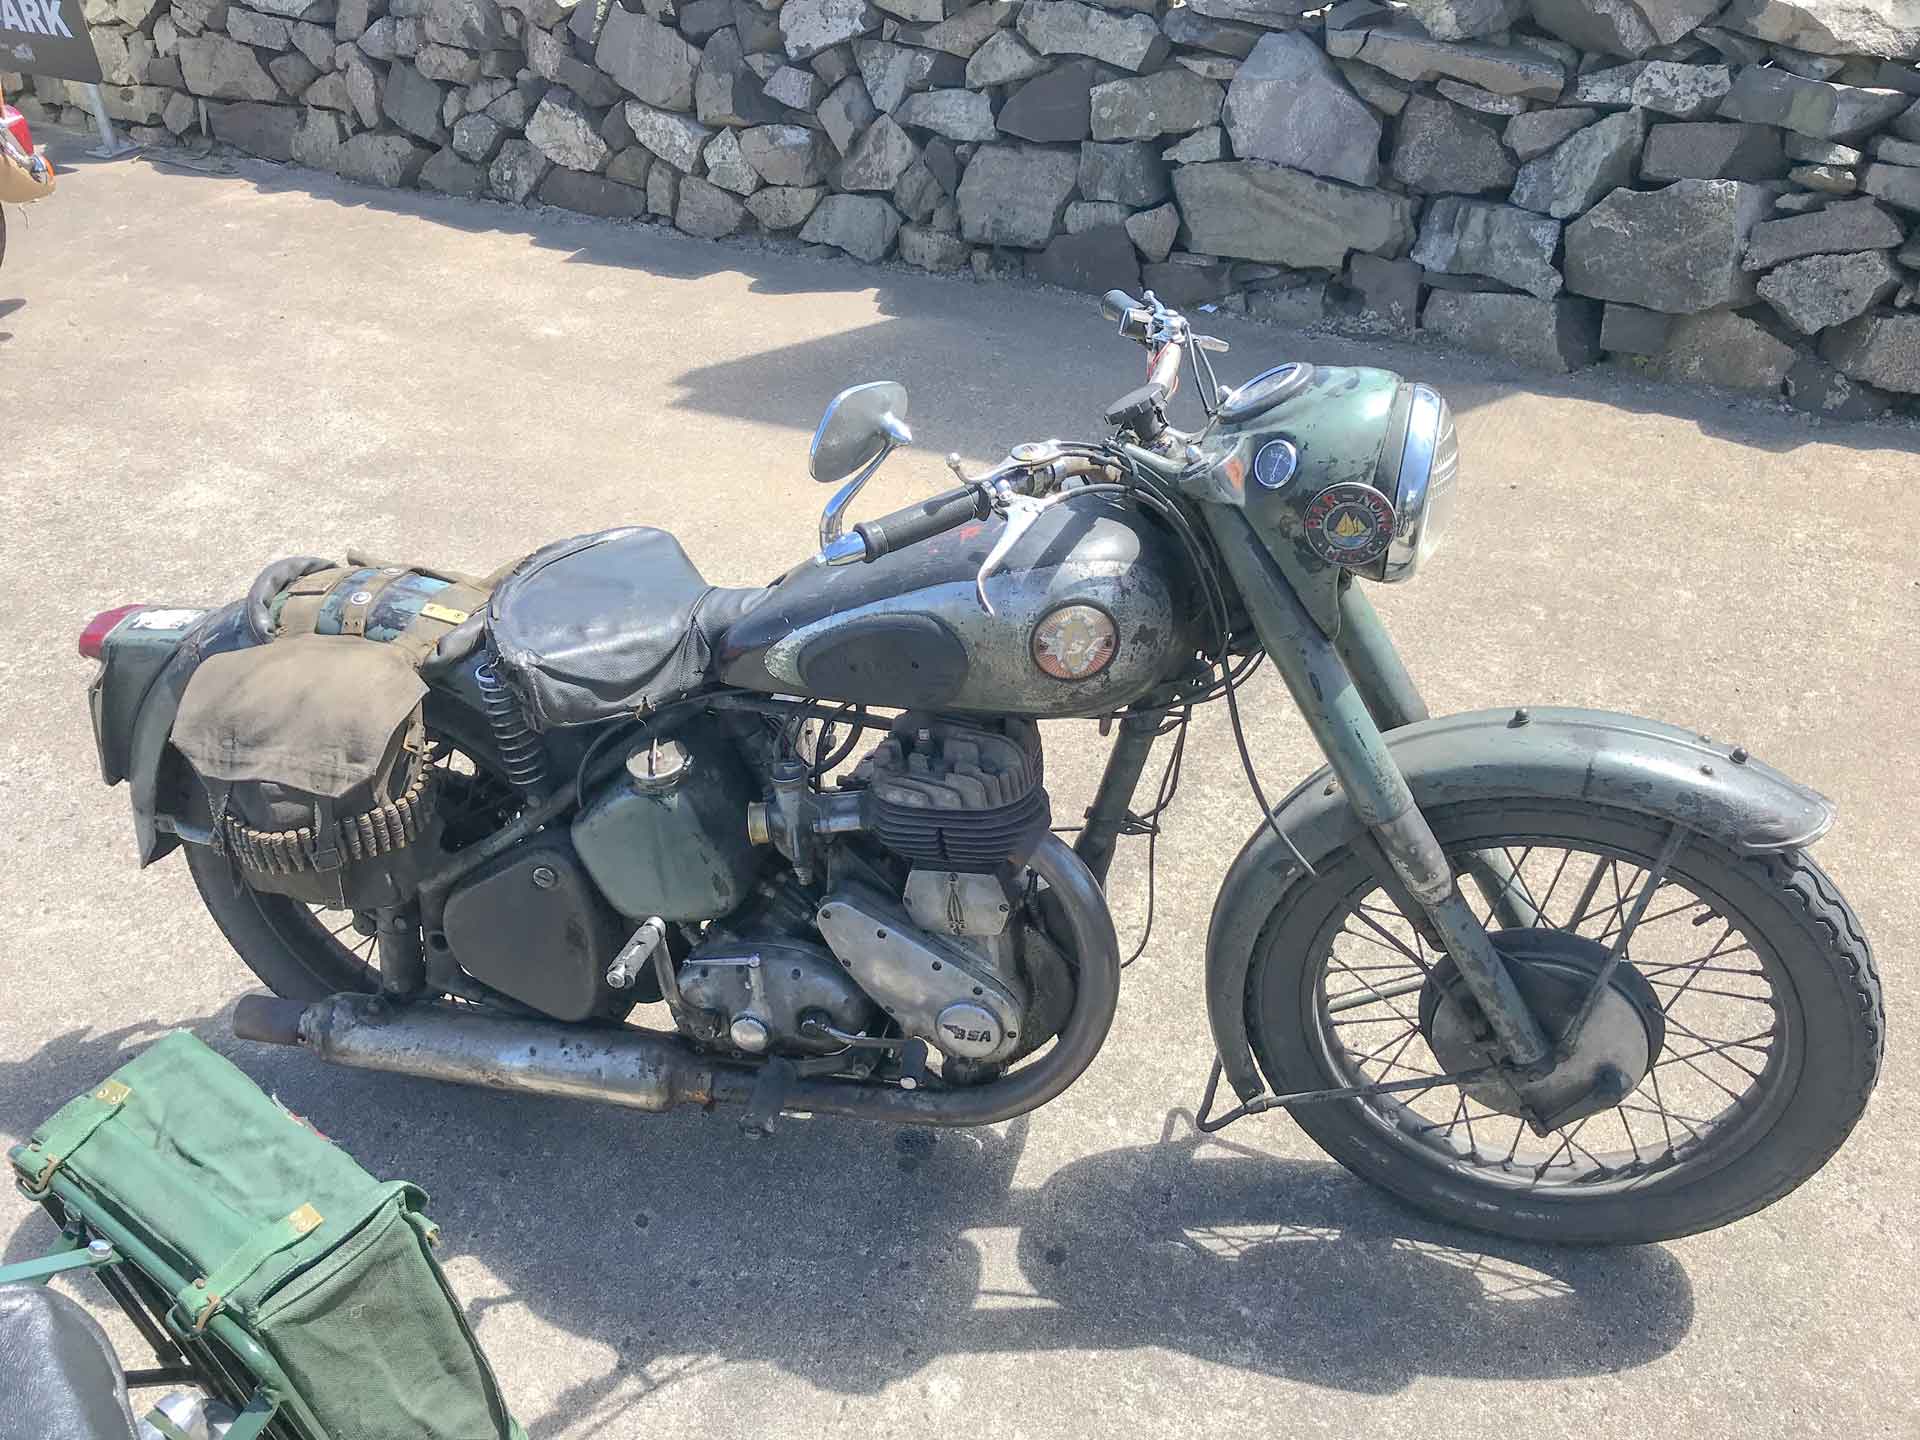 Motorcycle Tour in Ireland 2018 by Ayres Adventures, Day 1 - Arriving in Dublin